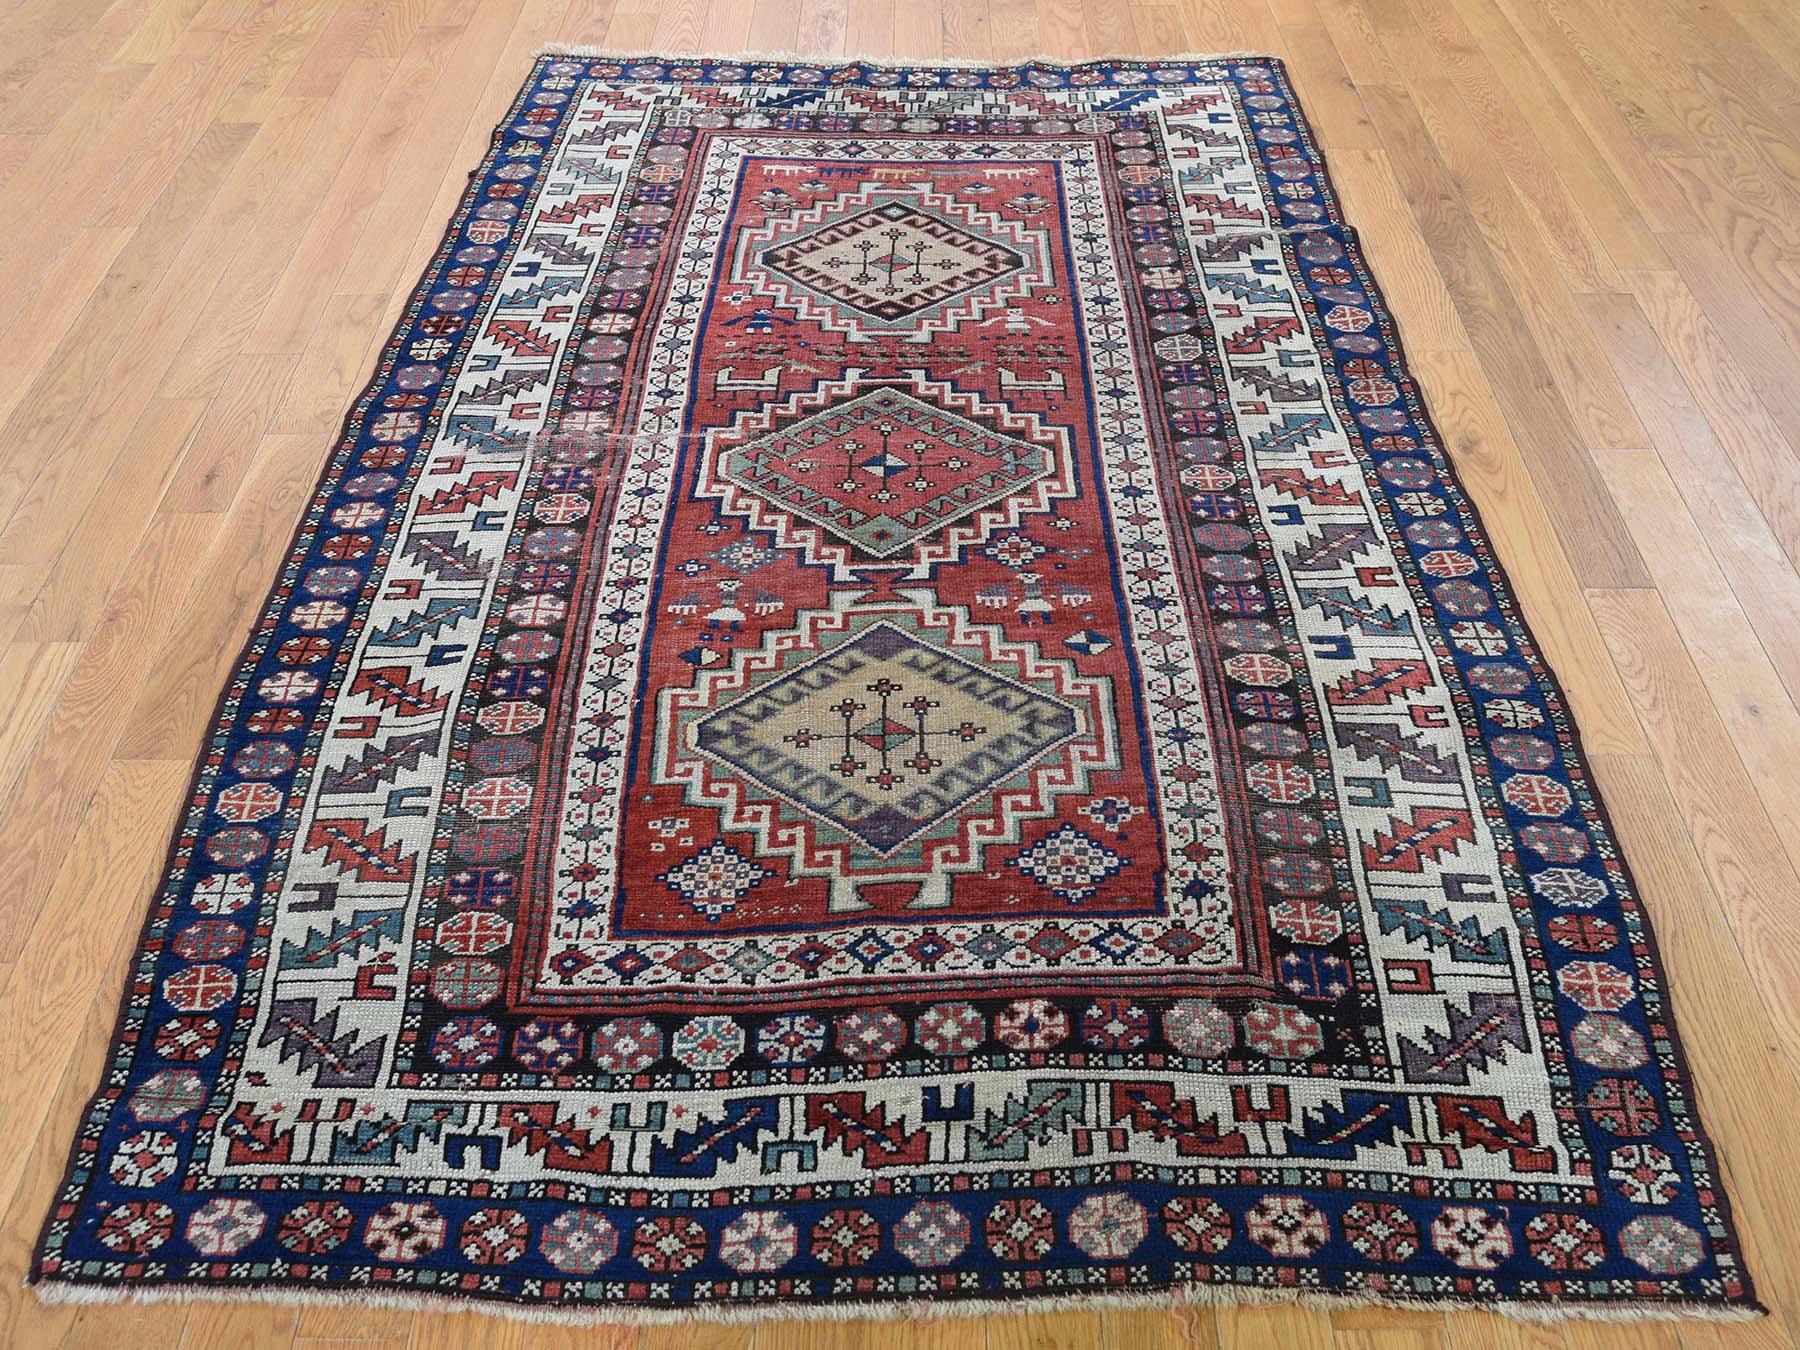 Description: This is a genuine hand knotted oriental rug. It is not and tufted or machine made rug. Our entire inventory is made of either hand knotted or handwoven rugs.

Enhance your room style with this marvelous hand knotted red antique